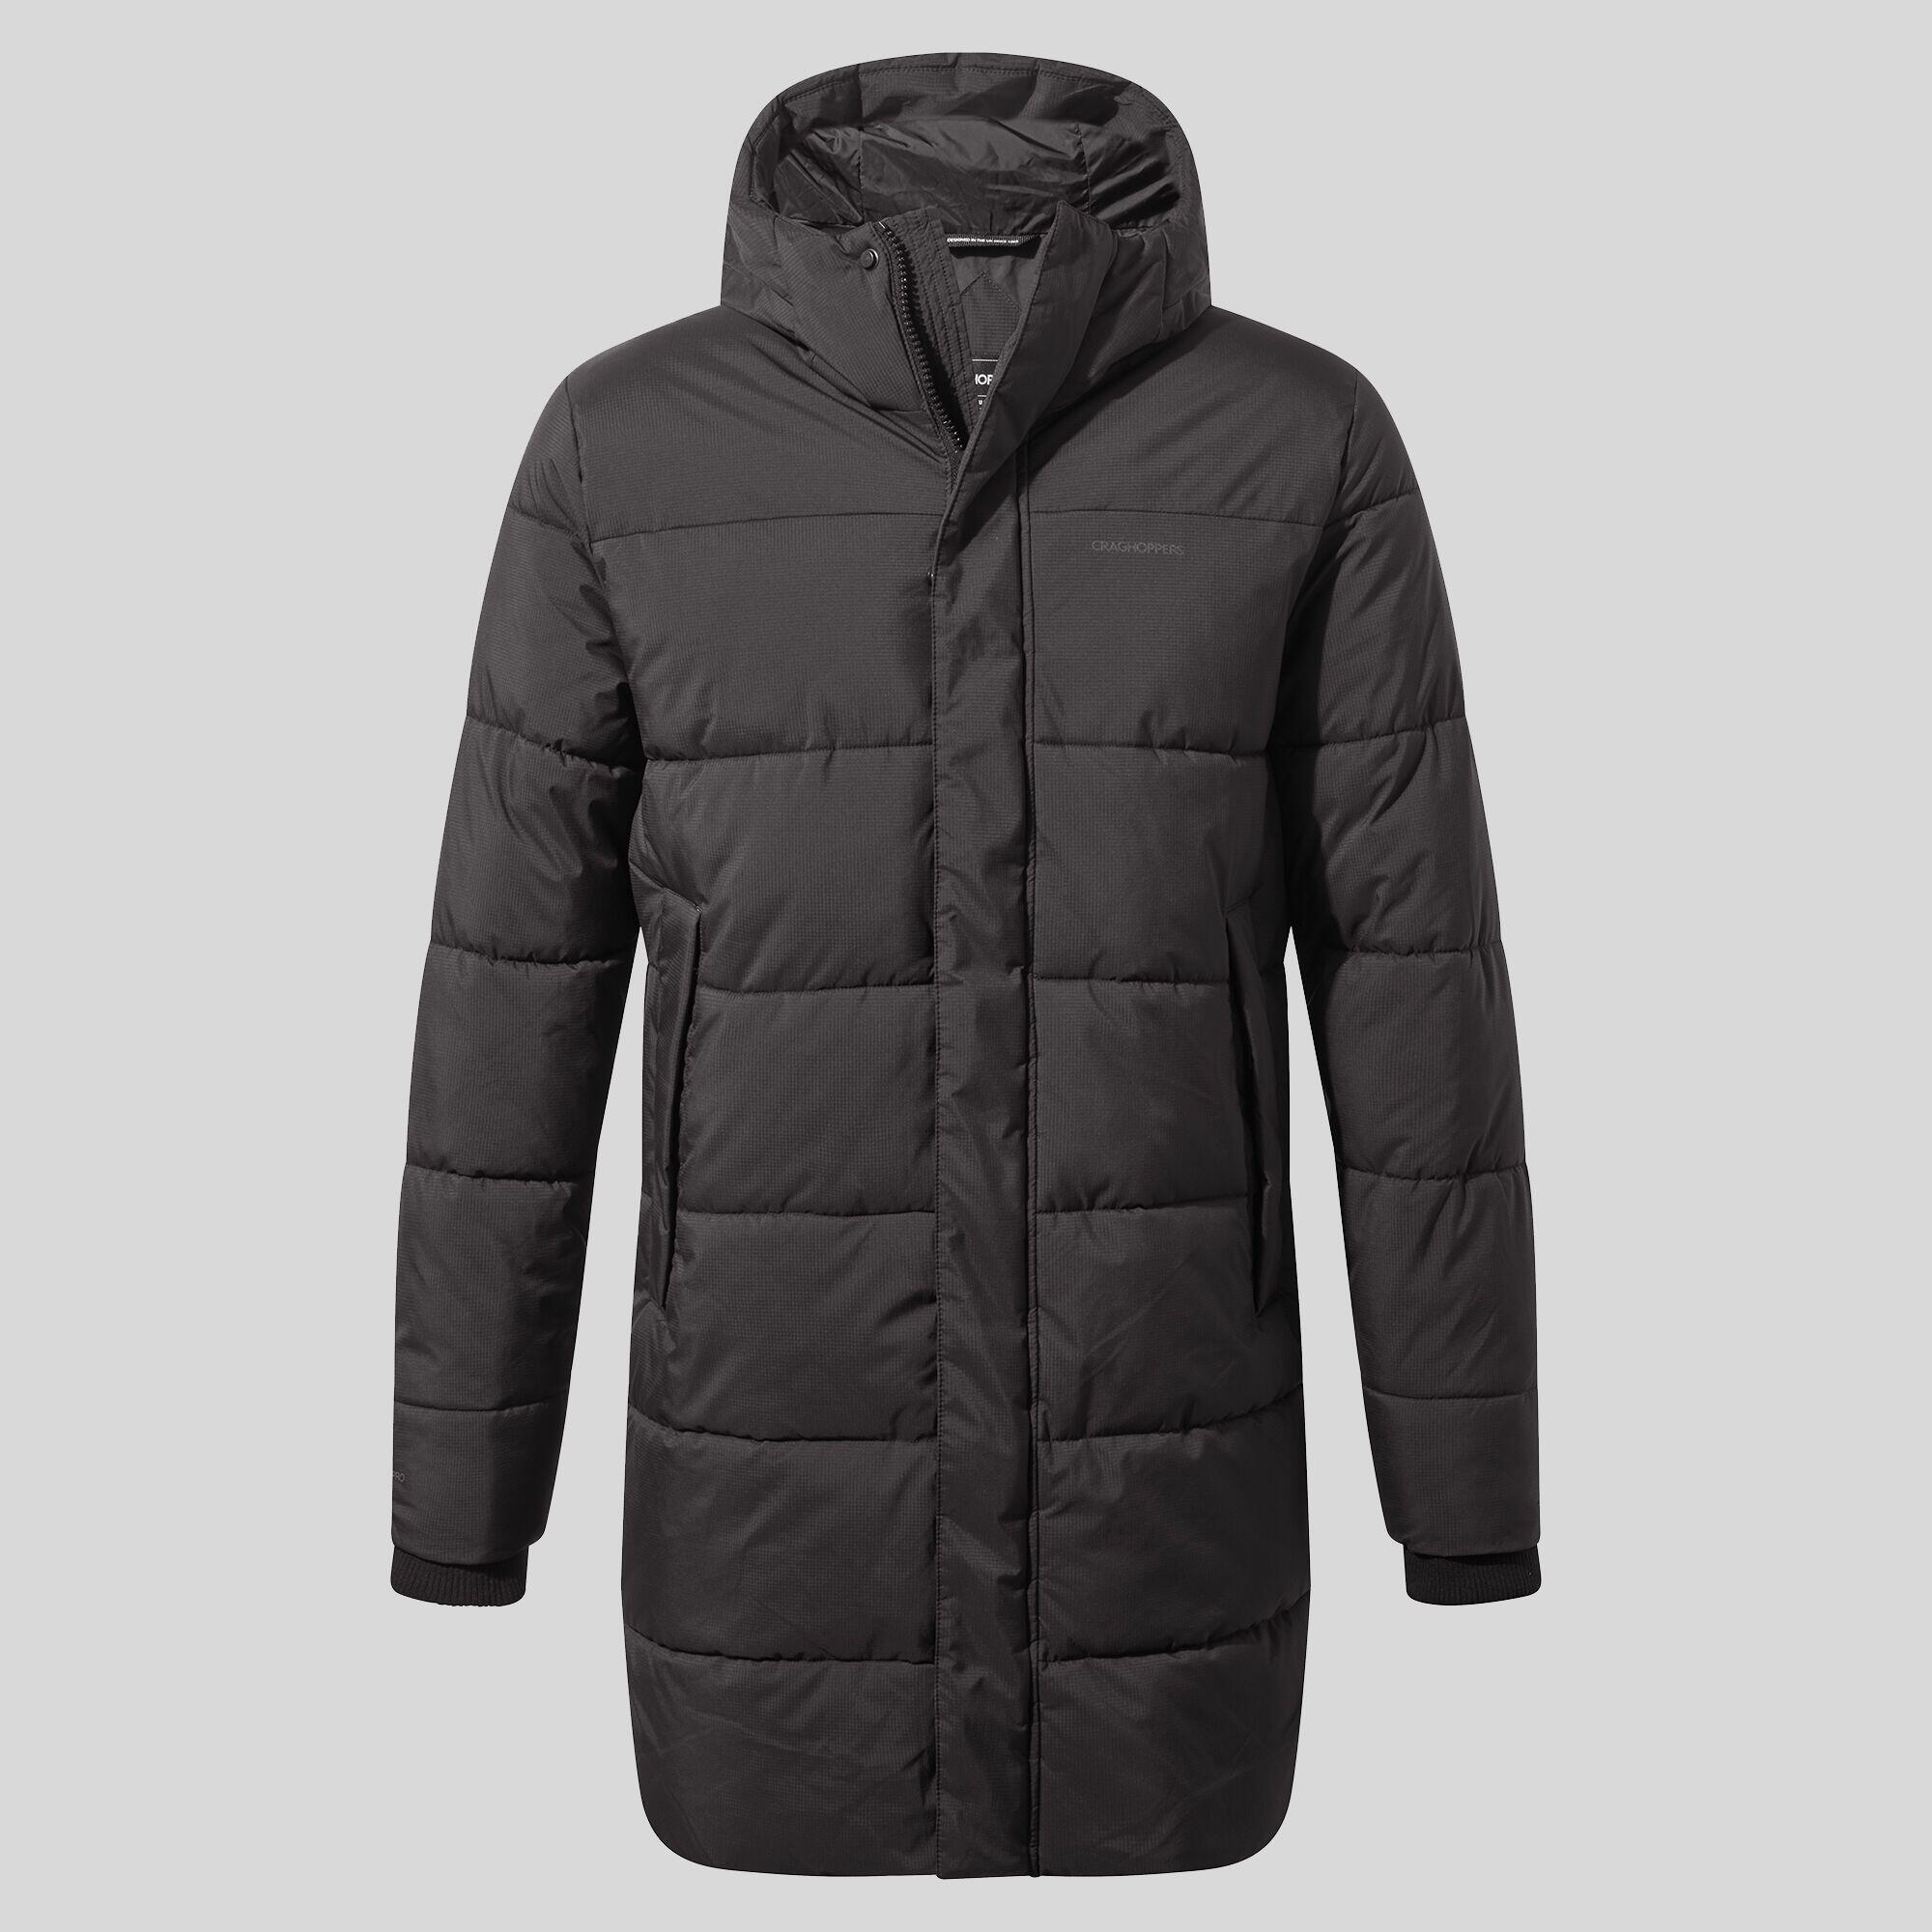 CRAGHOPPERS Men's Cormac Hooded Insulating Jacket